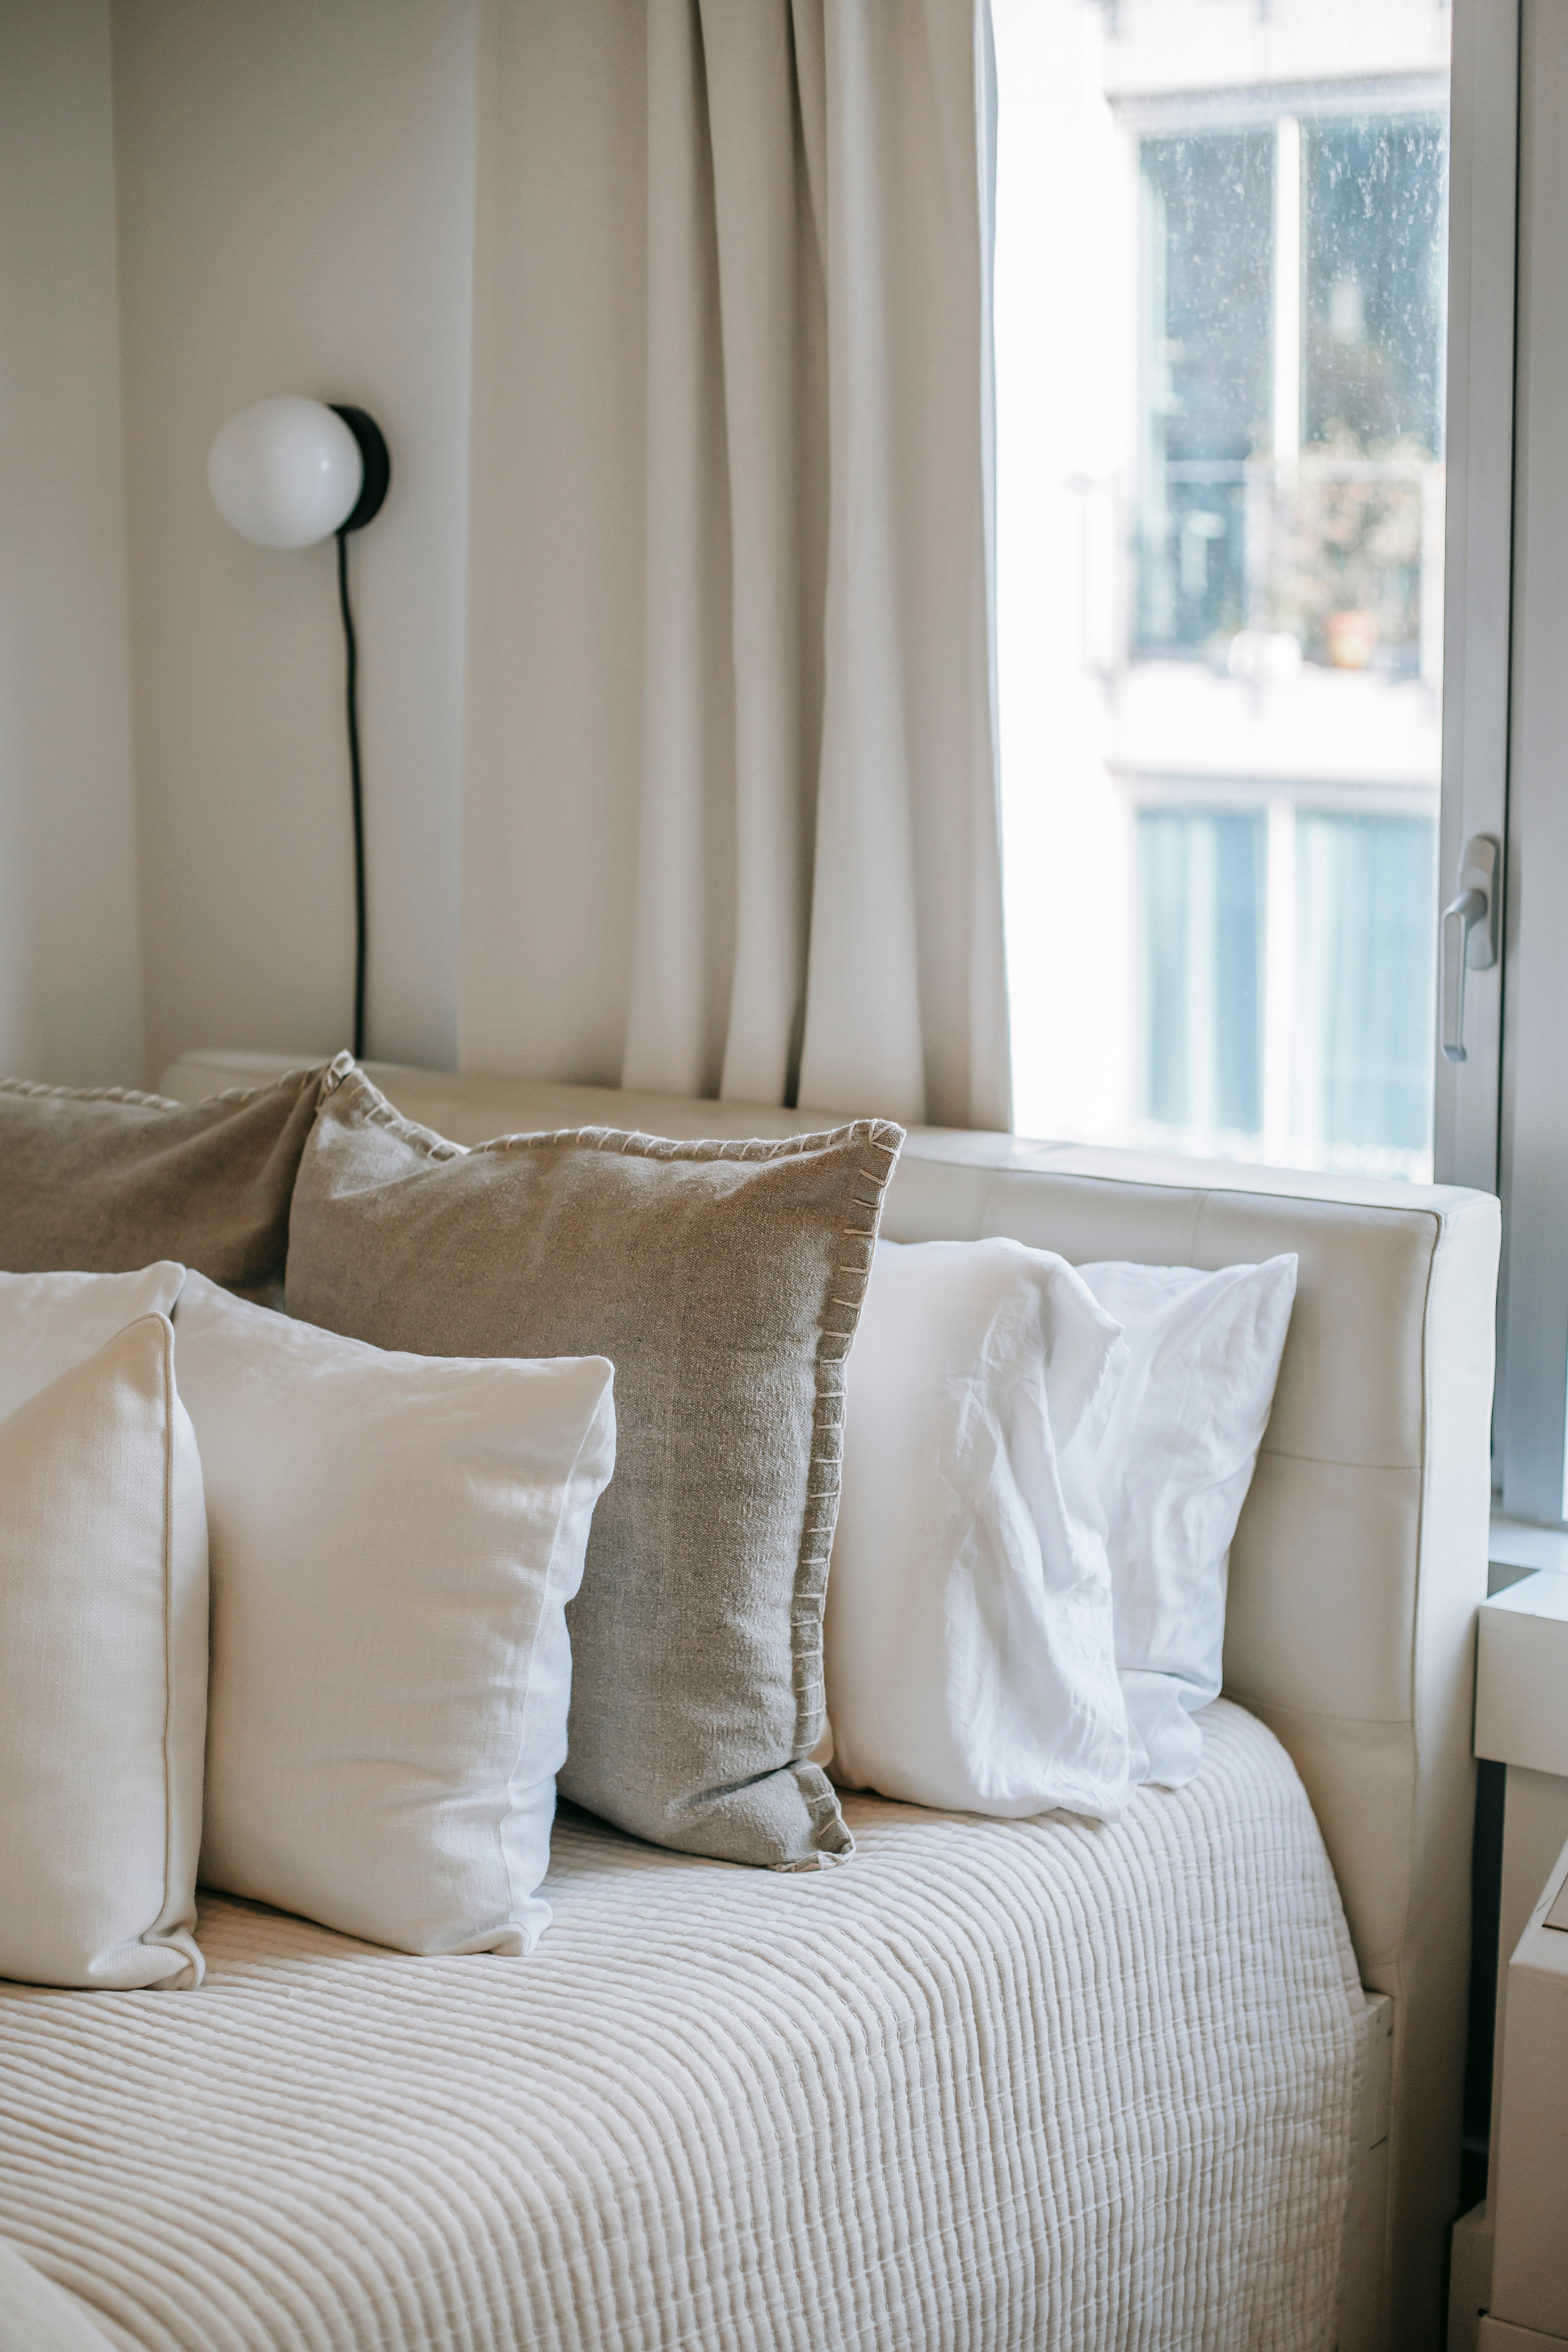 A cozy bed with white sheets, linen coverlet, and airy pillows in front of a bright window.